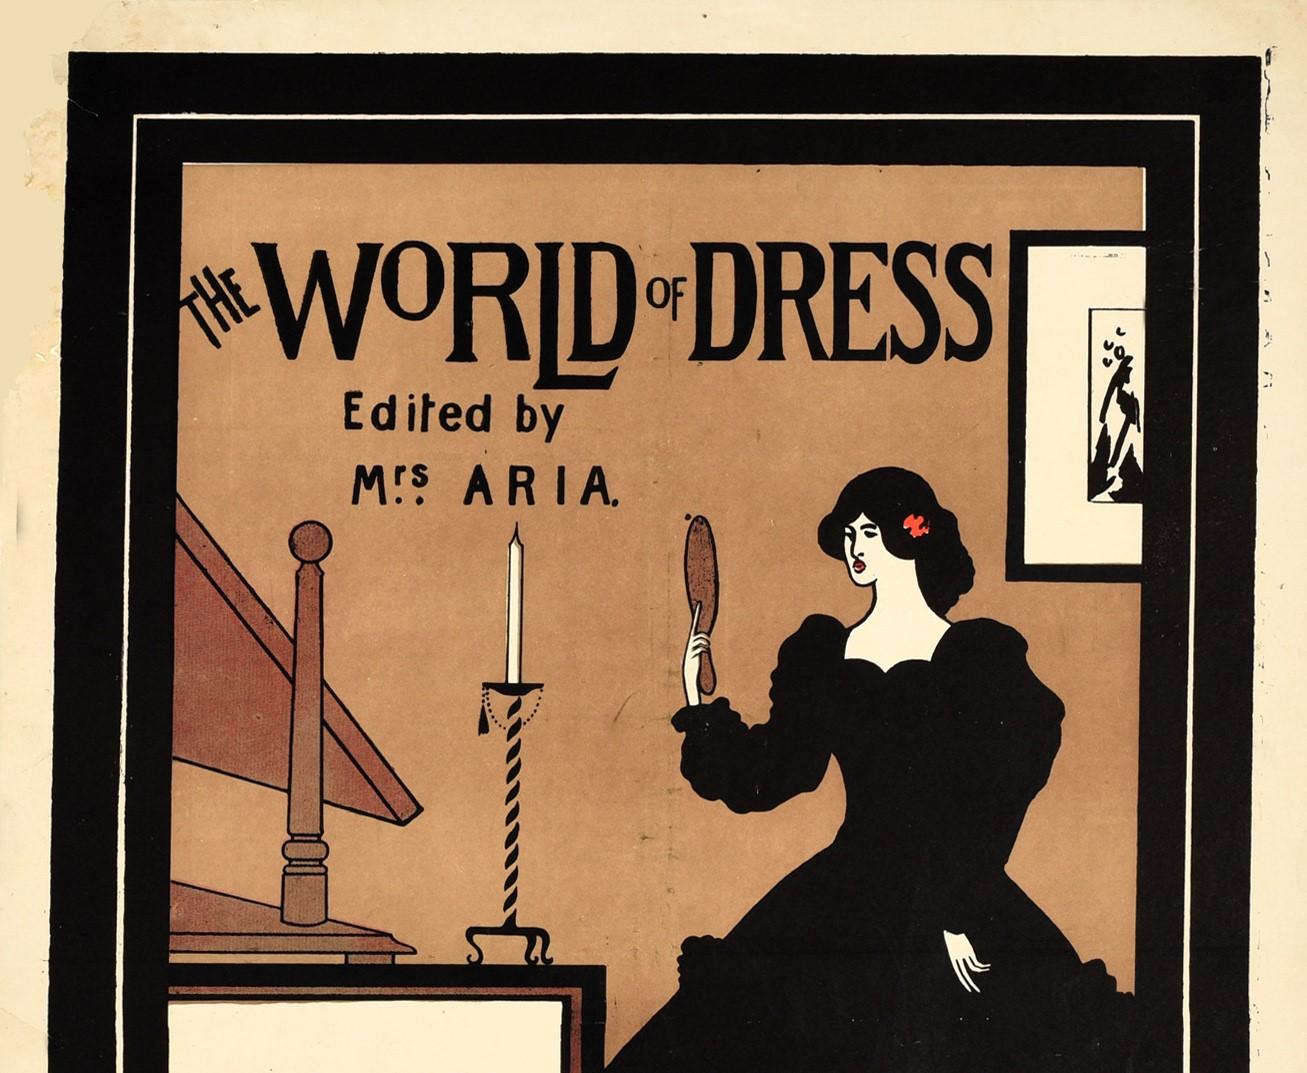 Original antique poster for The World of Dress edited by Mrs Aria Fashions of London Paris Vienna and New York New Year's number now ready Price 6d. Great design featuring an elegant lady wearing a black dress and looking at herself in a mirror with